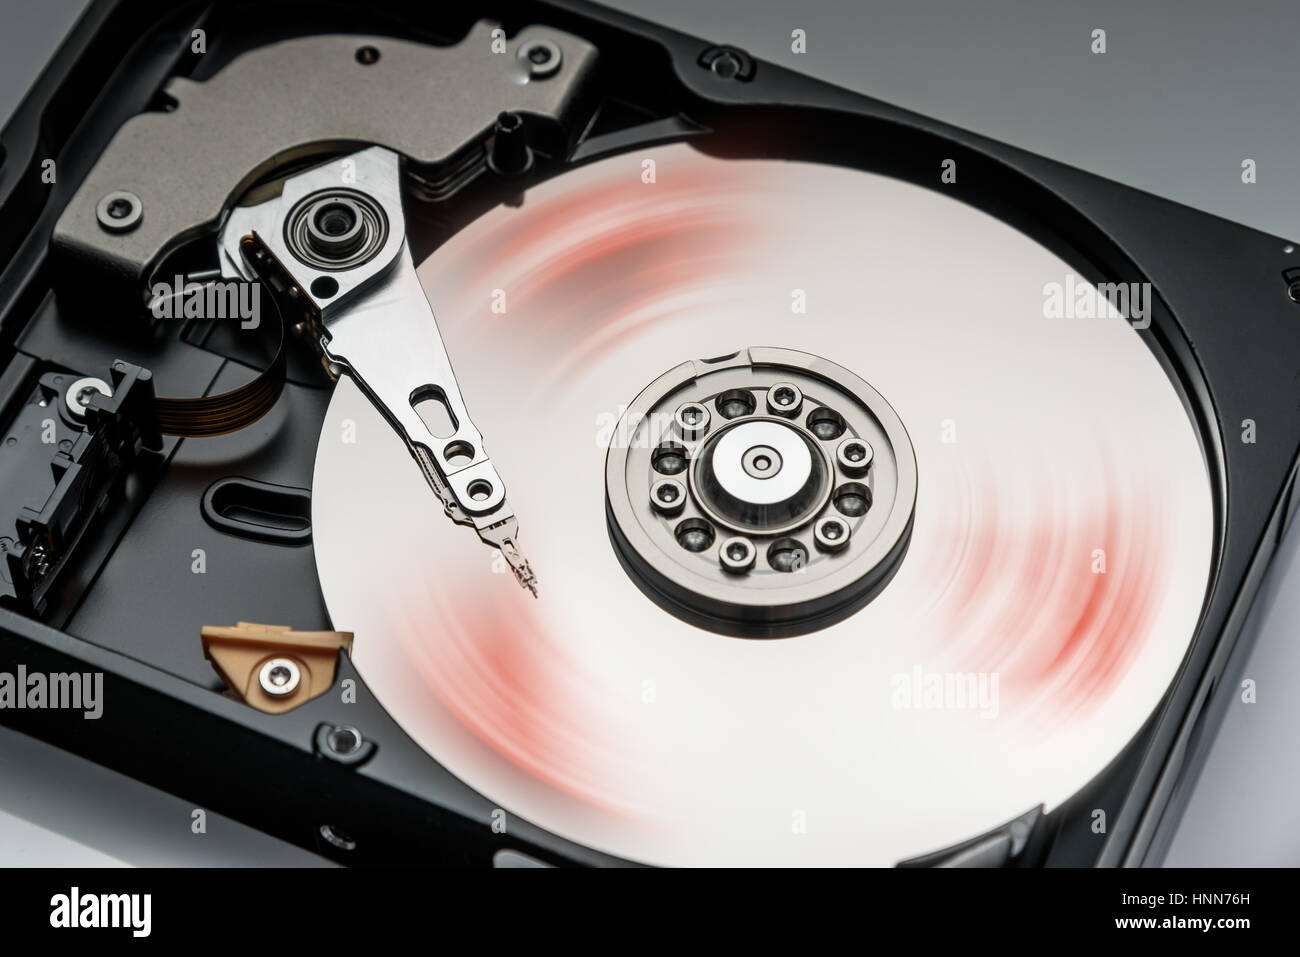 computer hard drive working closeup with details Stock Photo